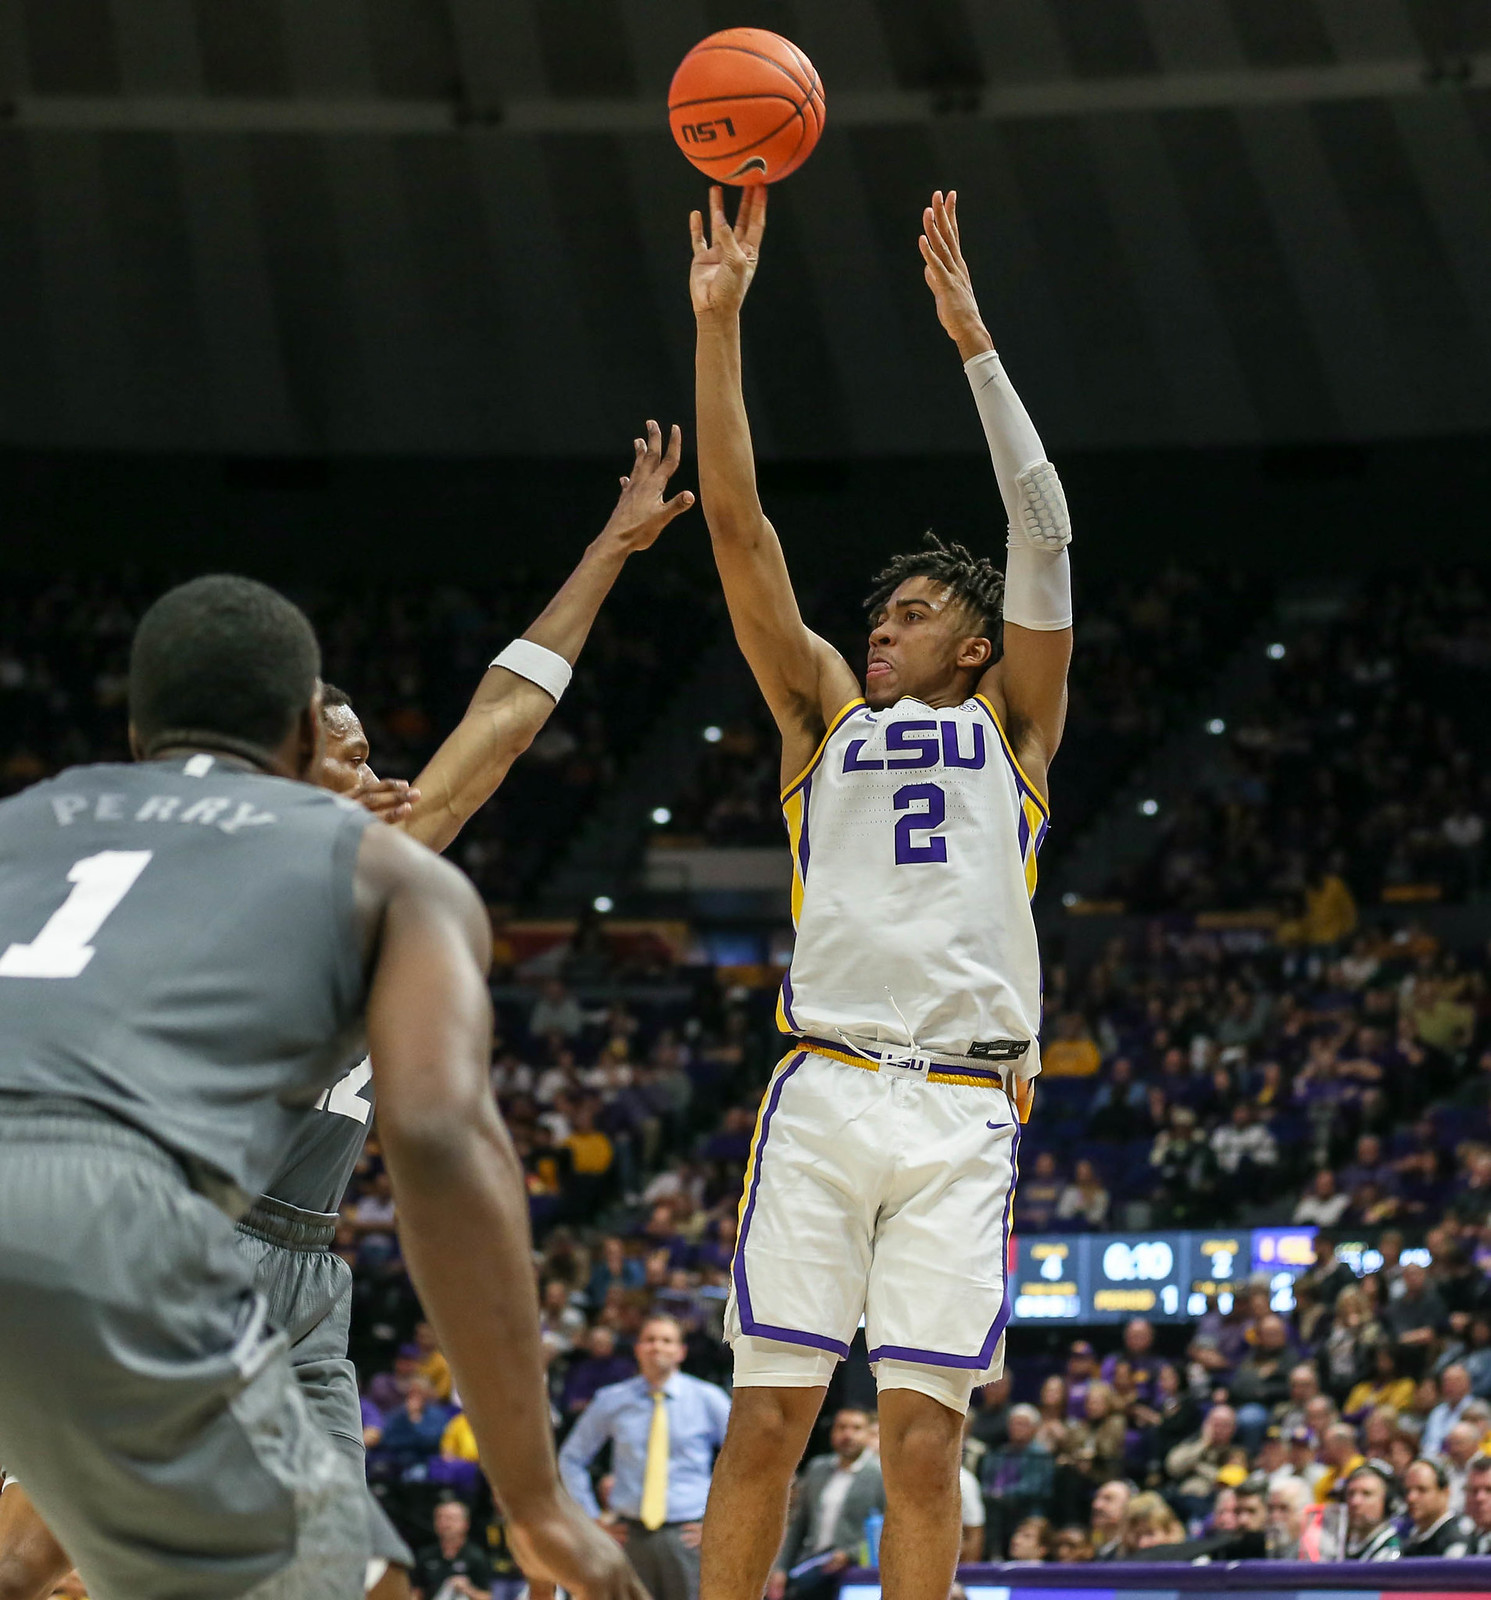 Miss State at LSU by Jonathan Mailhes (17)